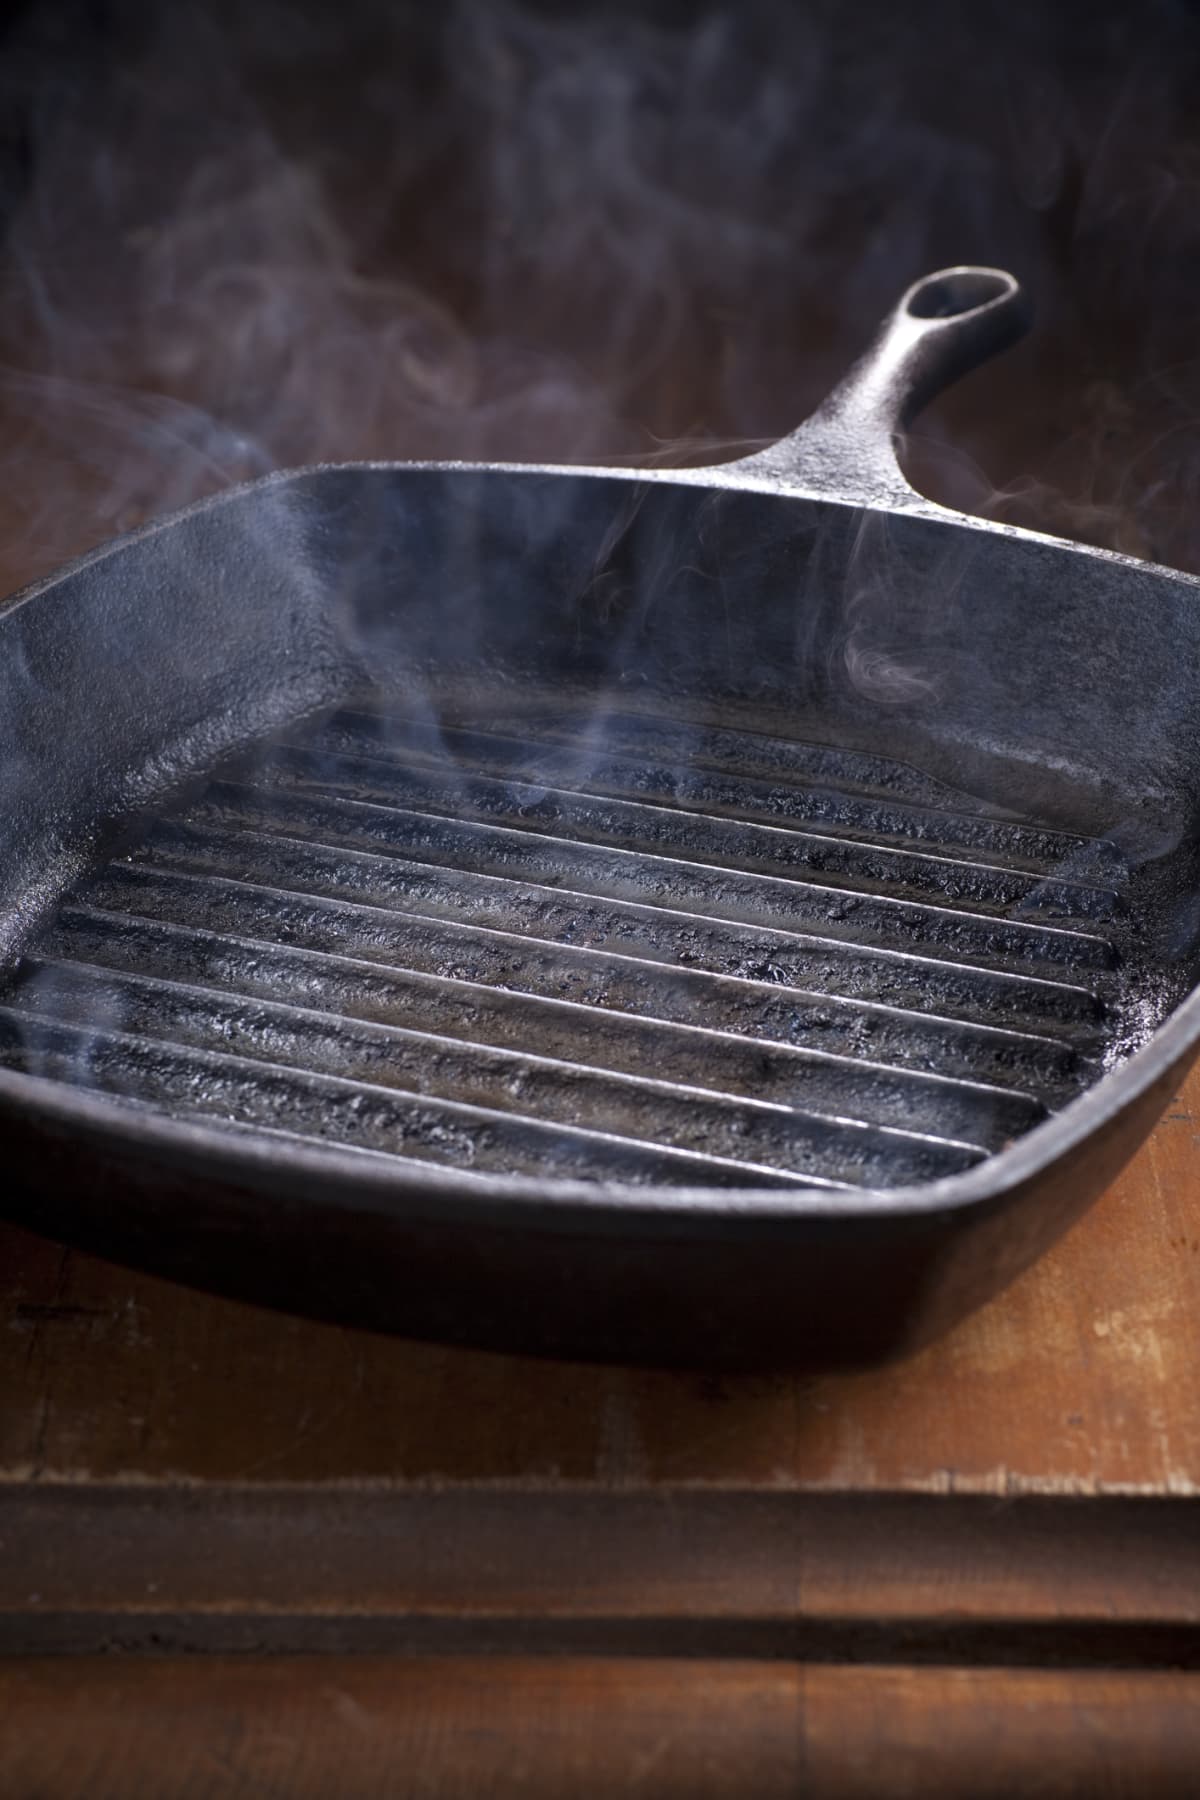 Smoking cast iron griddle pan on a dark wooden table, Newport, Wales, 2010